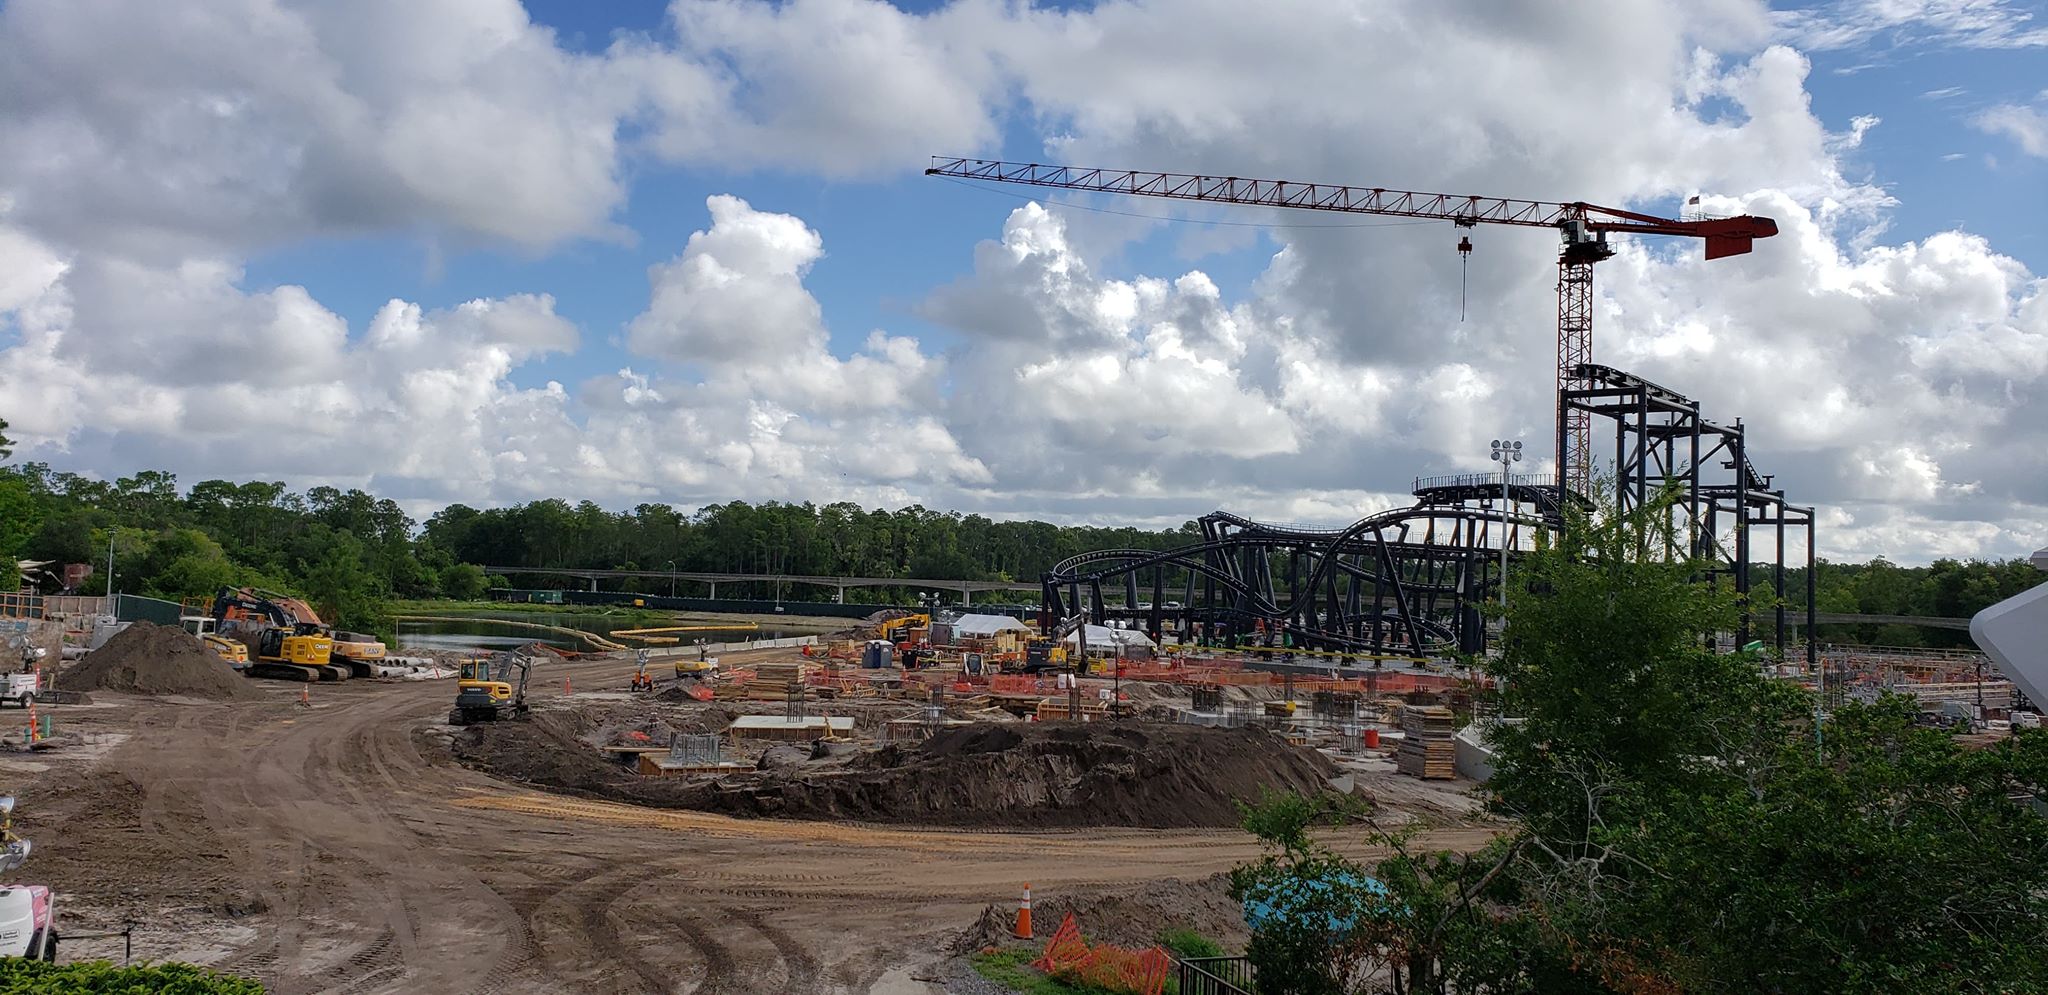 More Updates for TRON Coaster at the Magic Kingdom